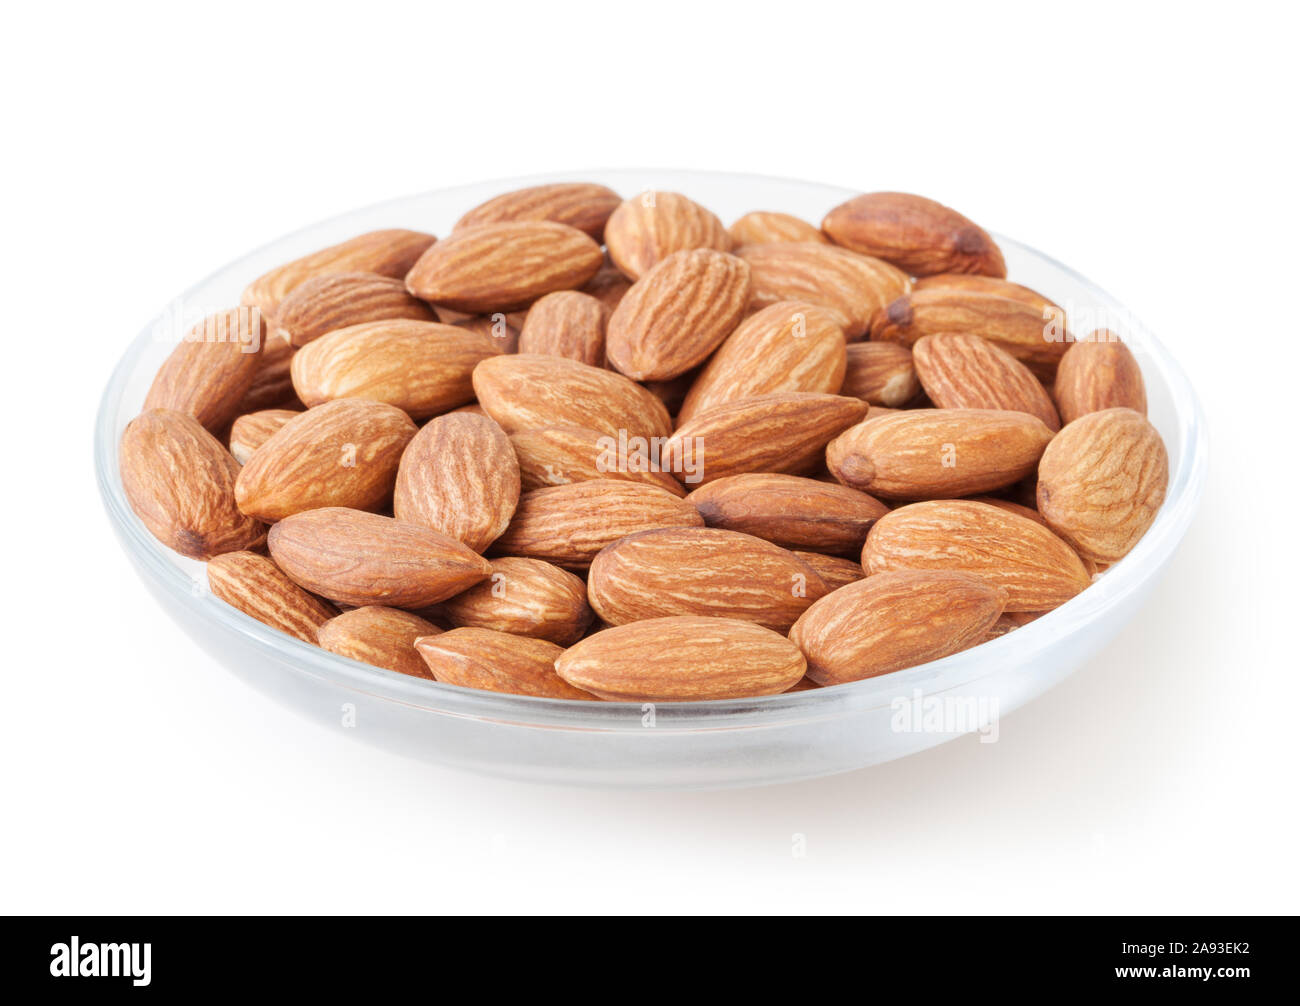 Almonds in glass bowl isolated on white background Stock Photo